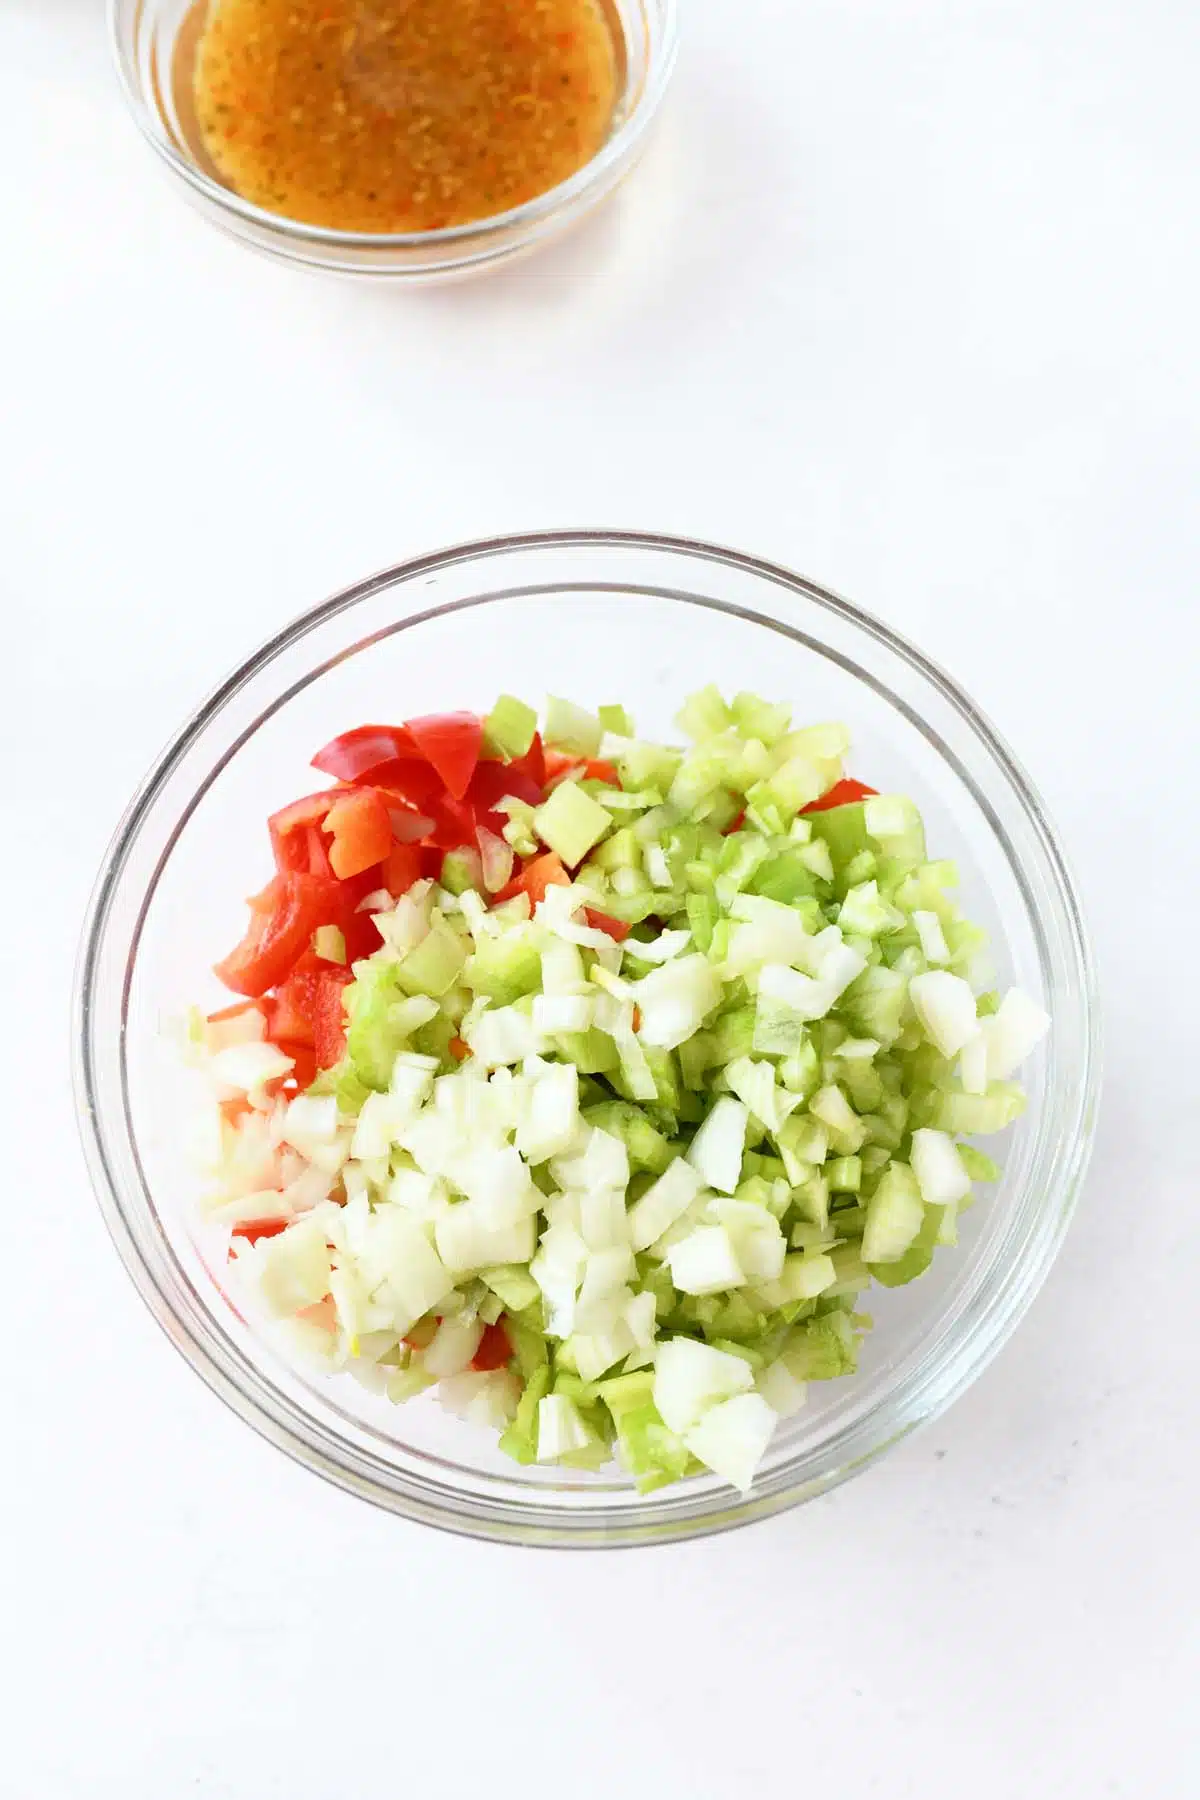 chopped vegetable in a glass bowl.